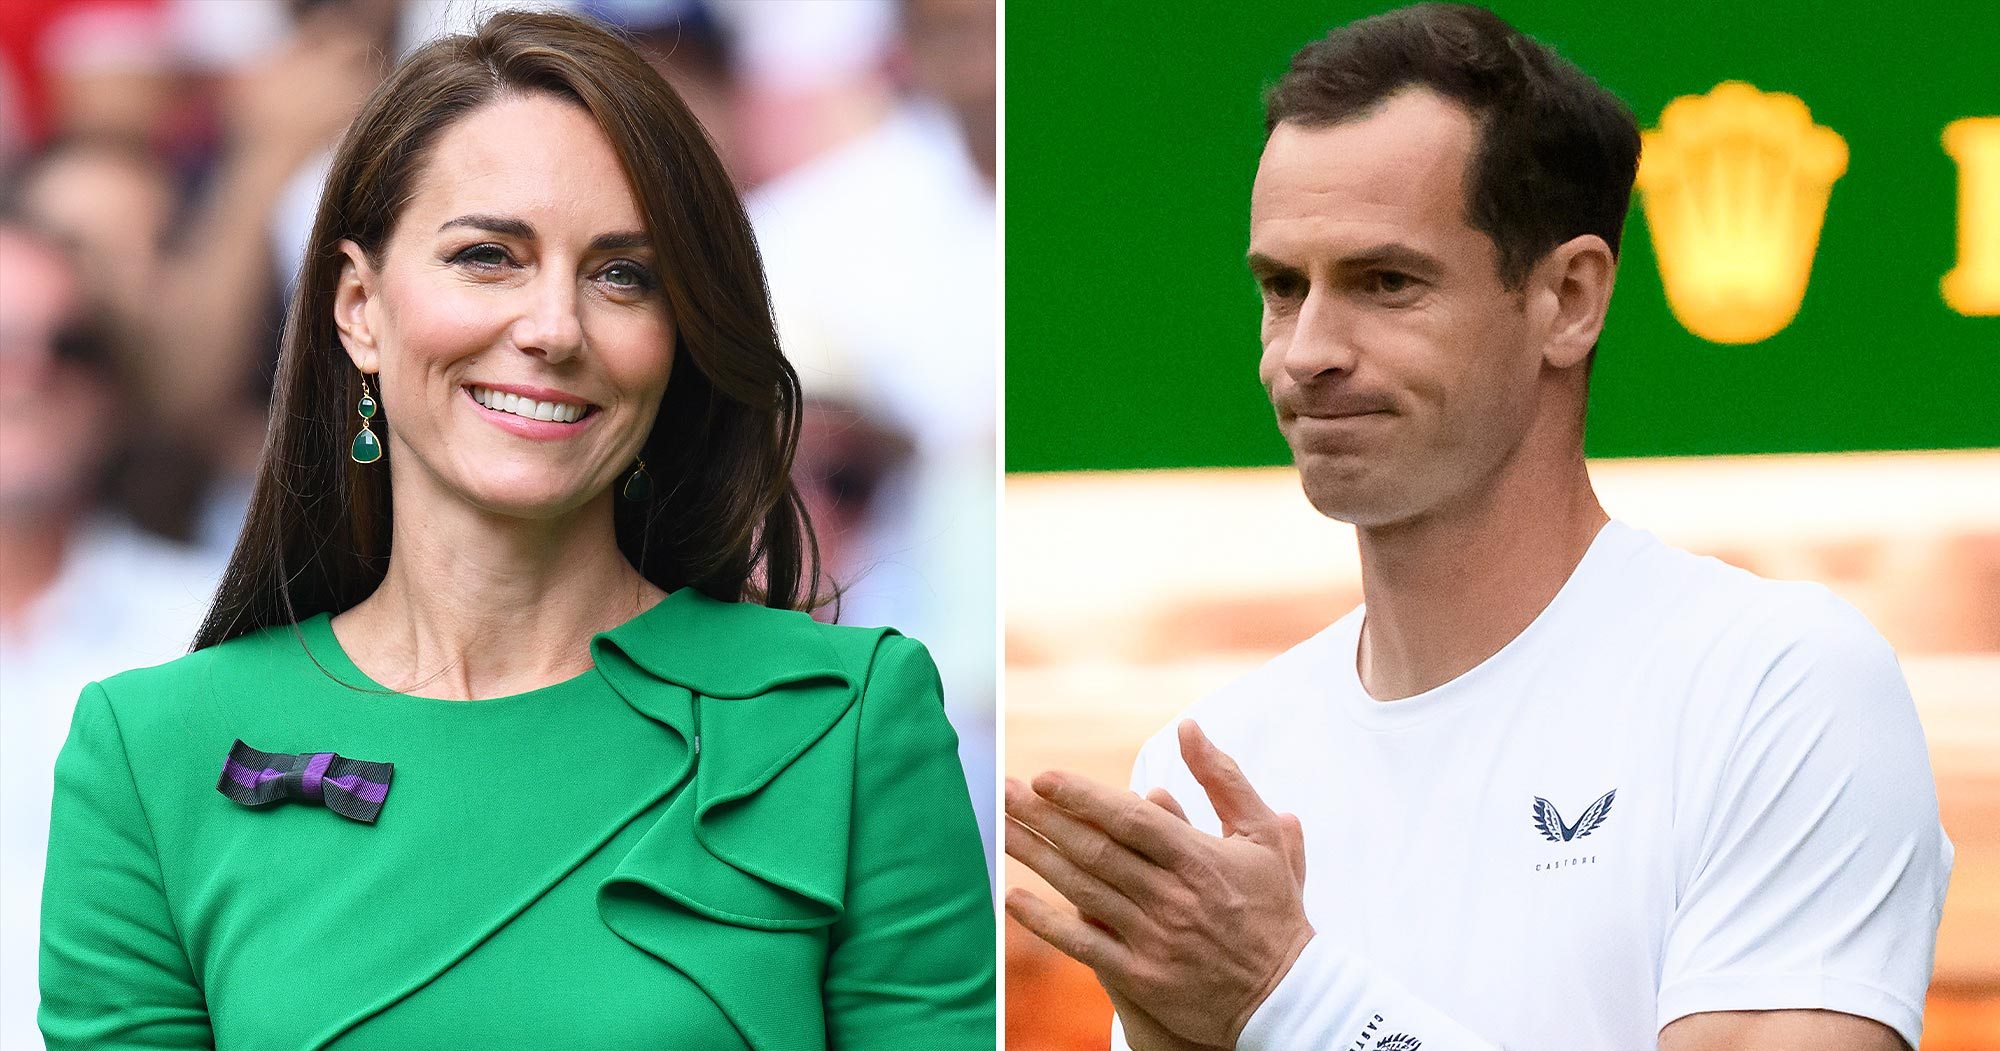 Kate Middleton's Heartfelt Message to Andy Murray at Wimbledon